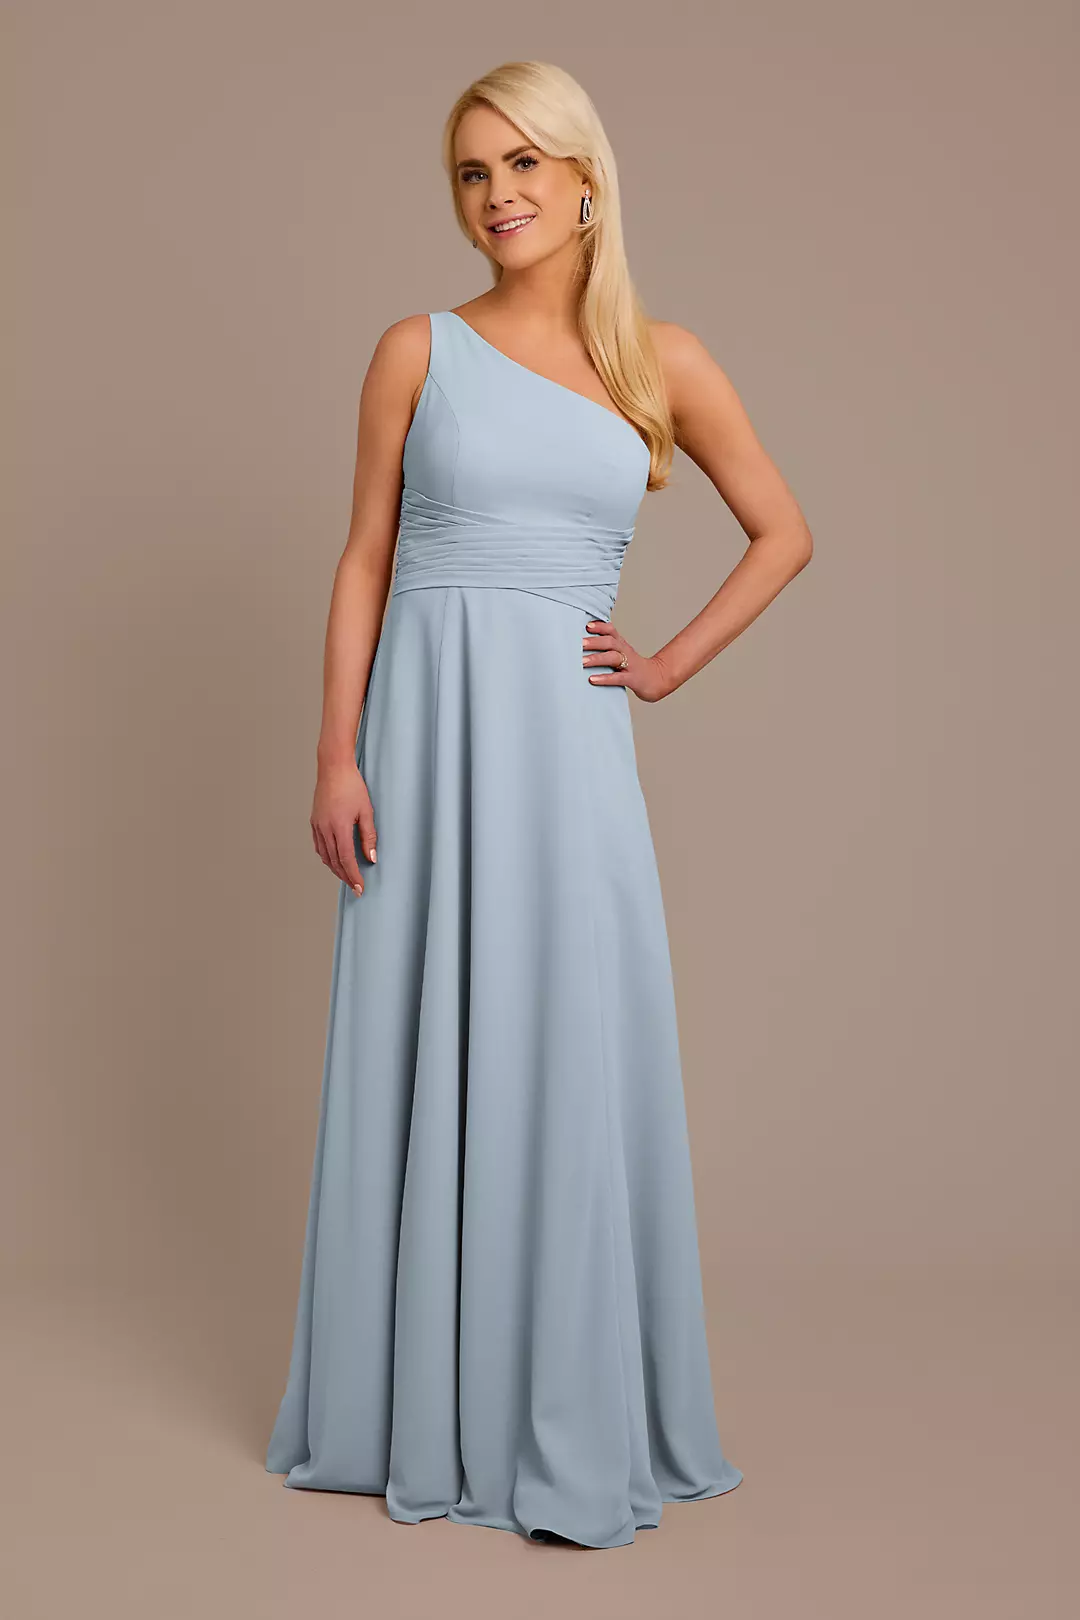 Chiffon One-Shoulder Bridesmaid Dress with Tie Image